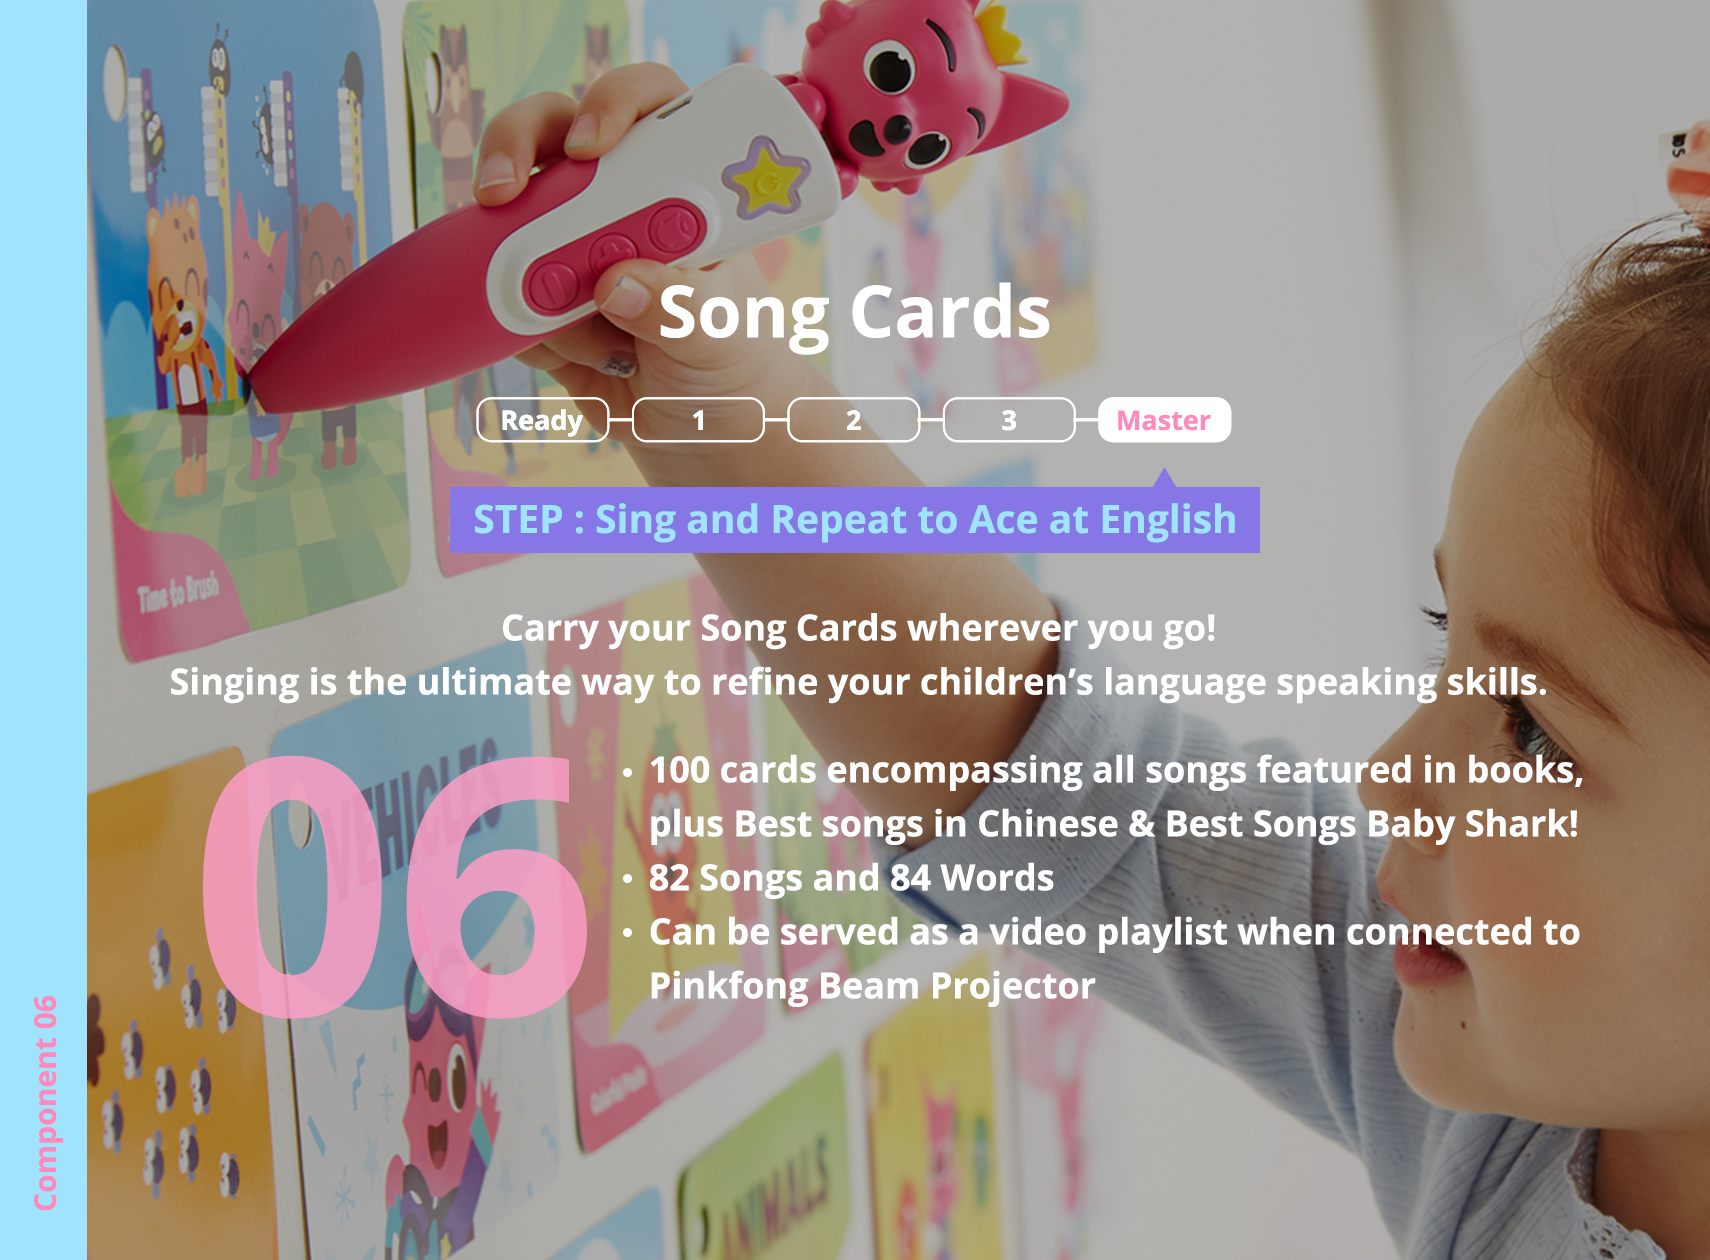 STEP : Sing and Repeat to Ace at English. Carry your Song Cards wherever you go! Singing is the ultimate way to refine your children’s language speaking skills.